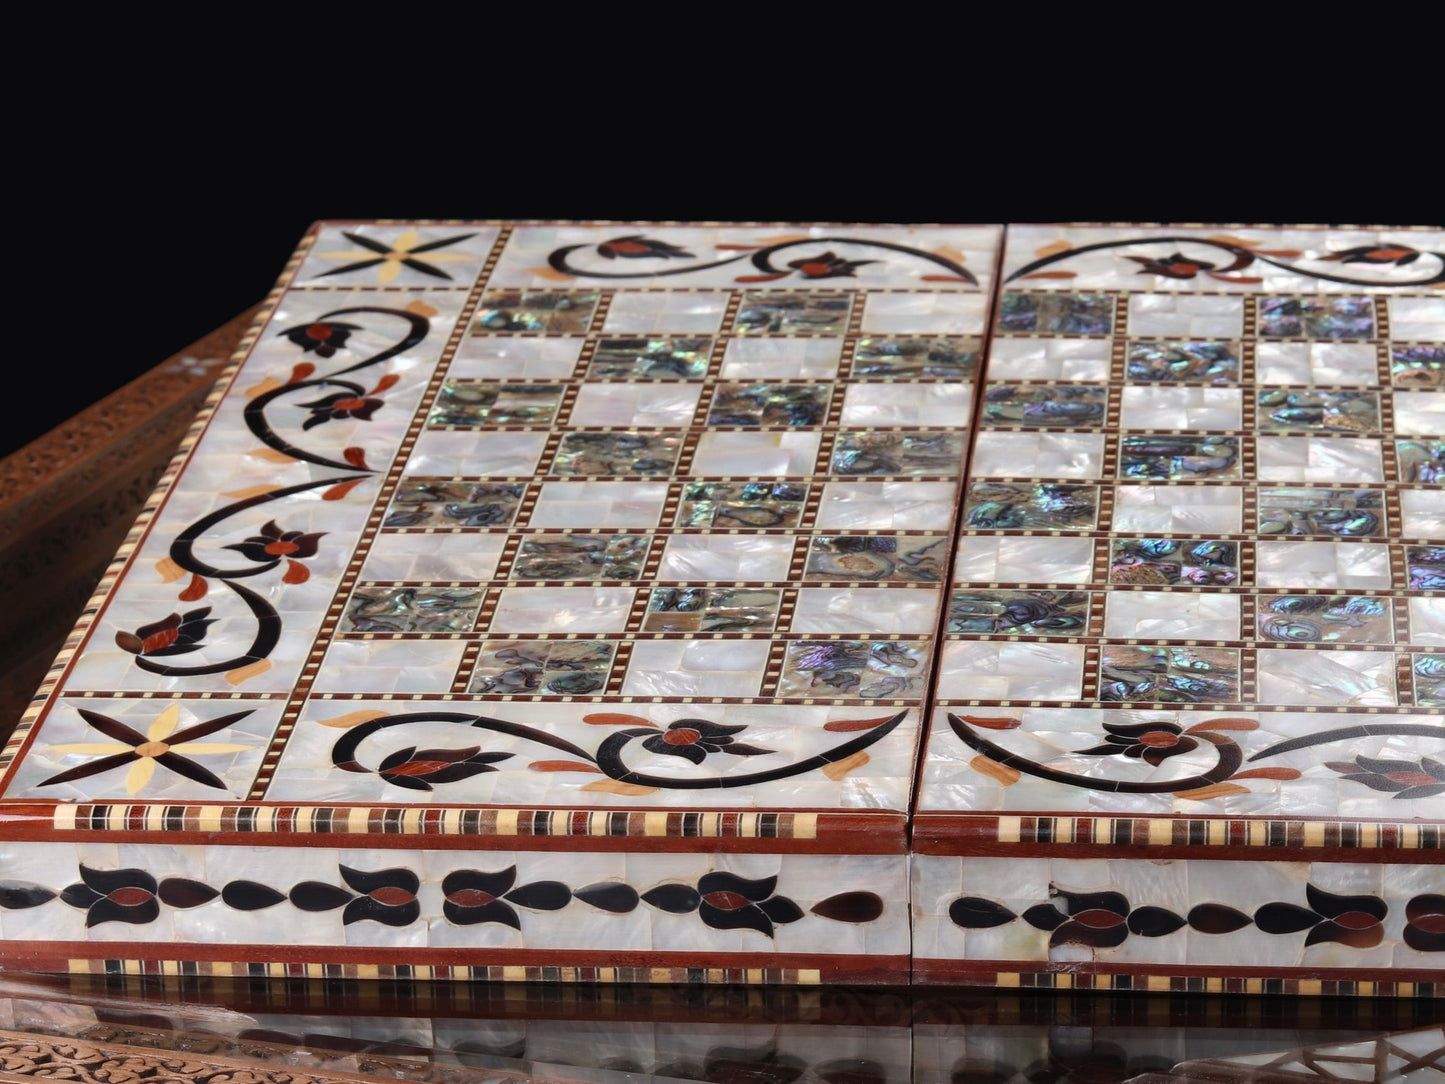 Chess and Backgammon Game Set - Covered in Mother of Pearl